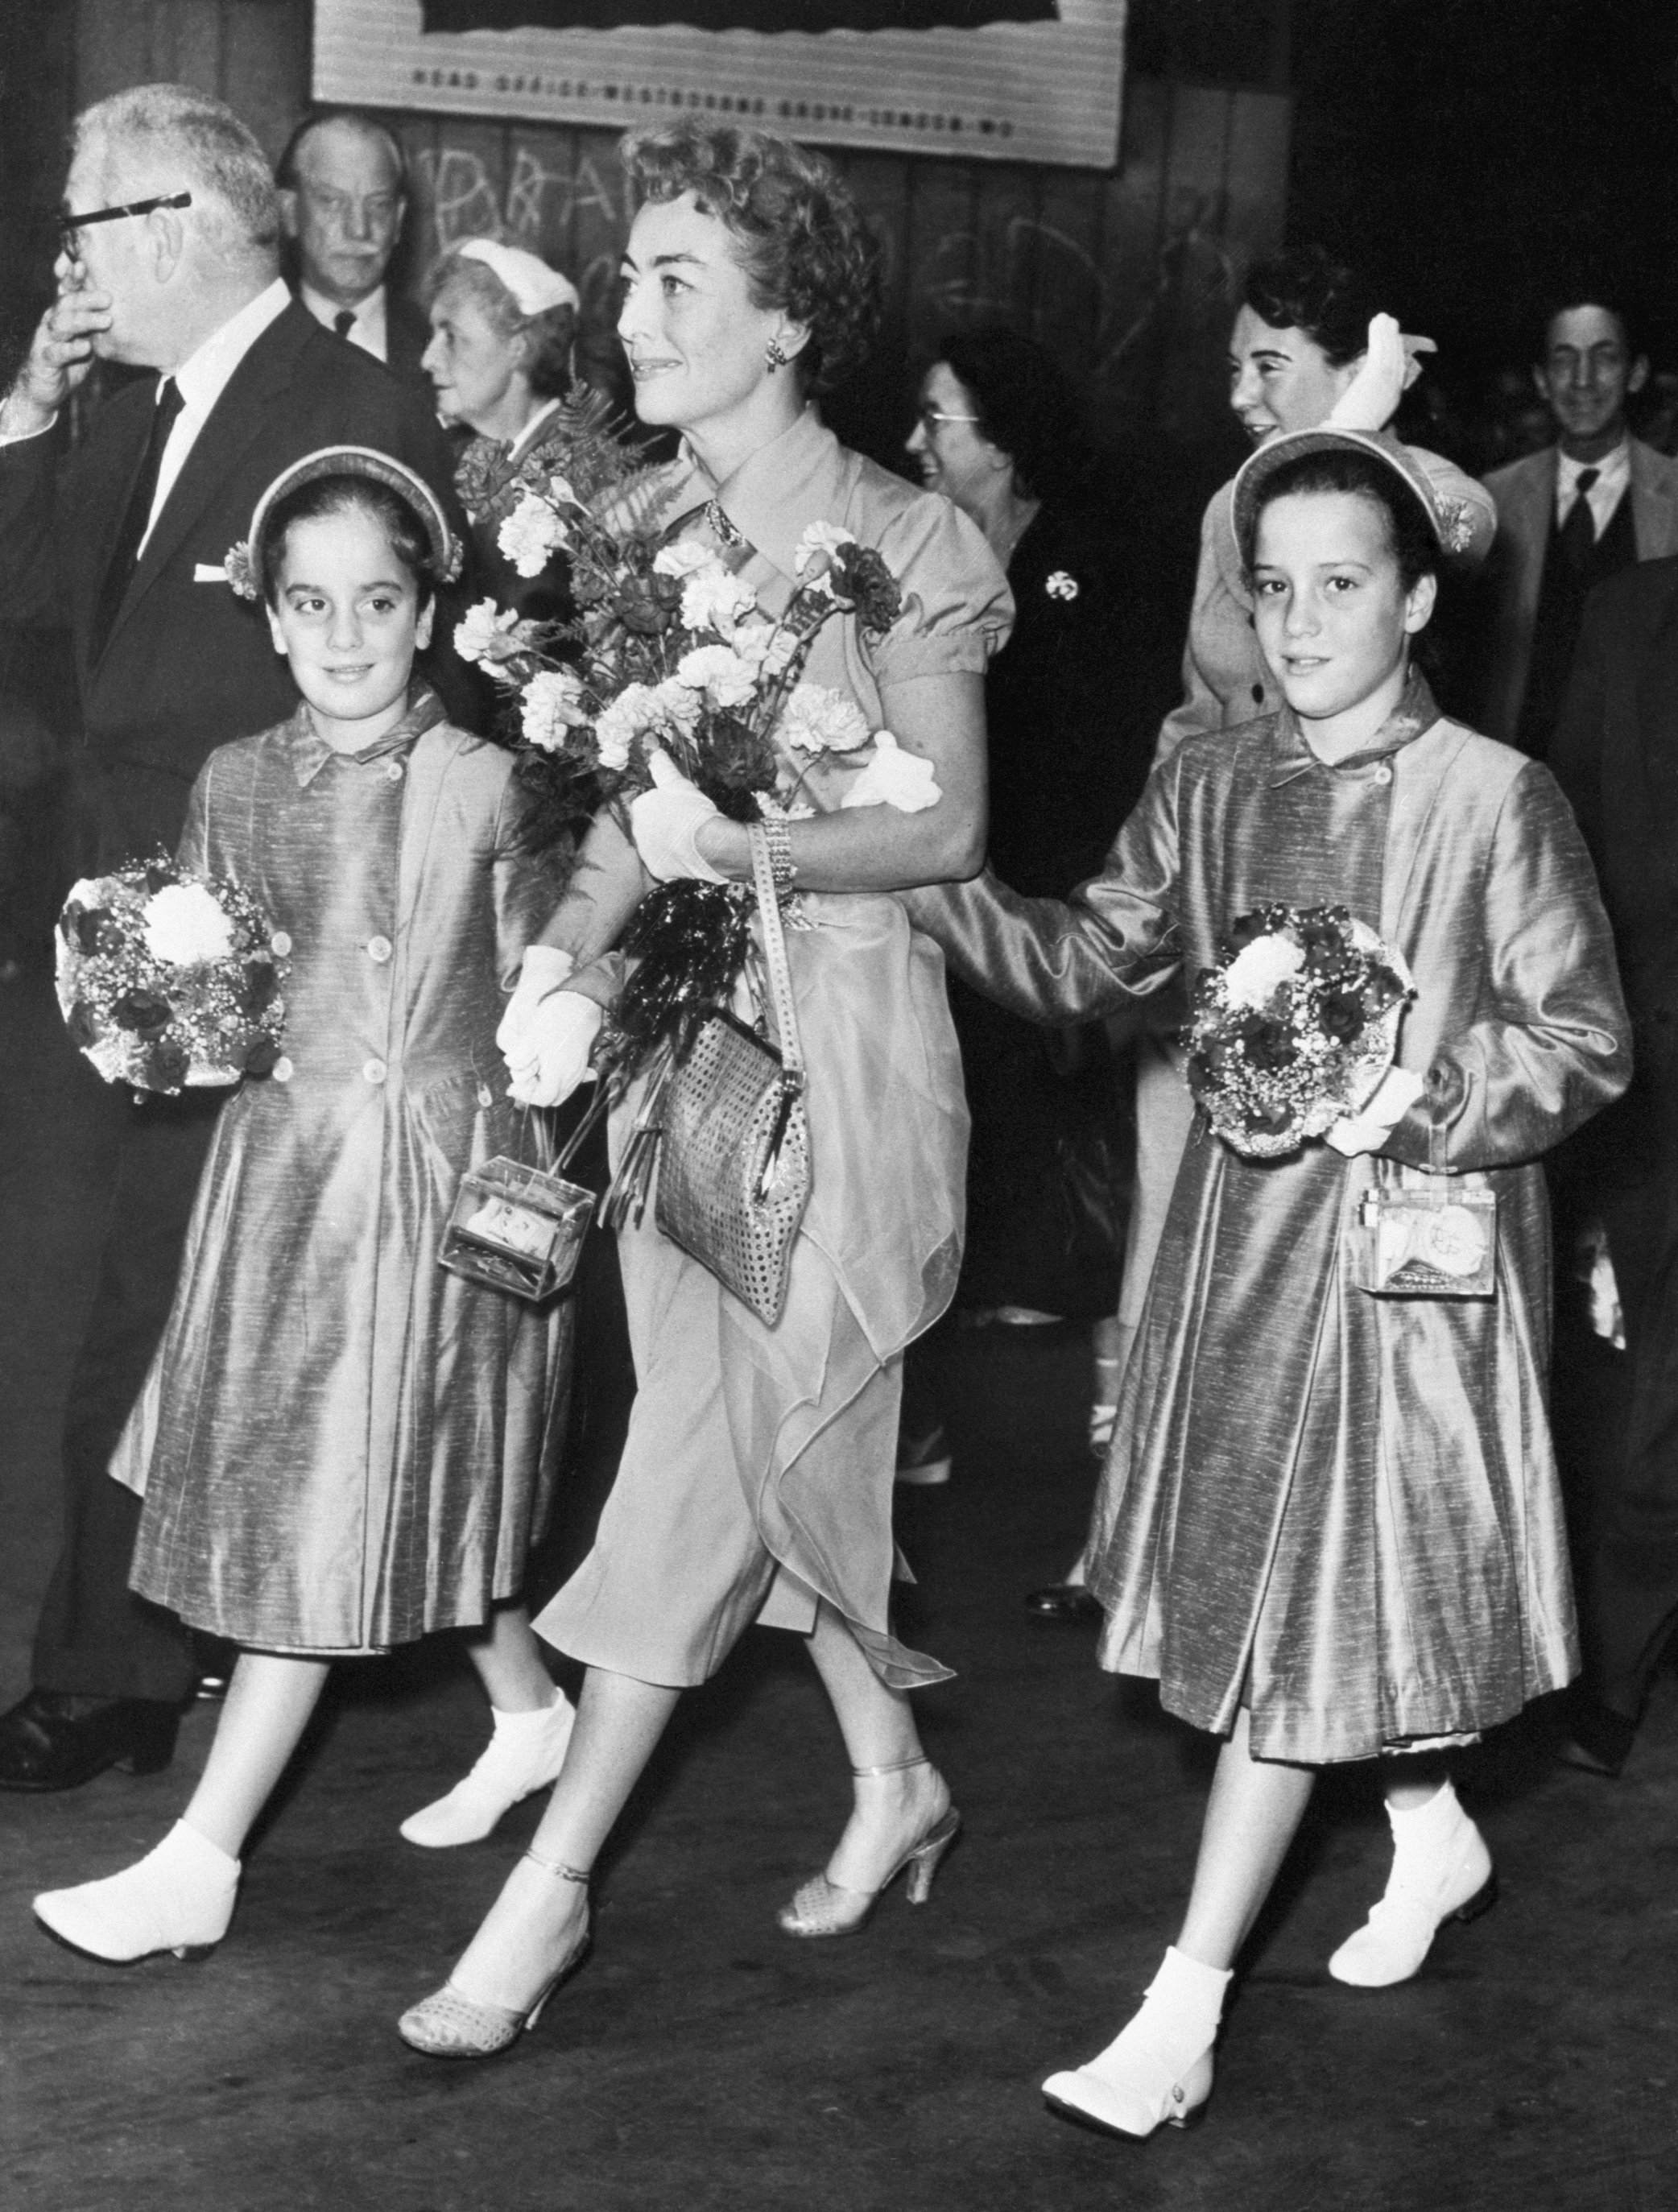 Joan Crawford walking down the platform of London's Paddington Station with her adopted twin daughters, Cynthia (right) and Cathy. / Source: Getty Images